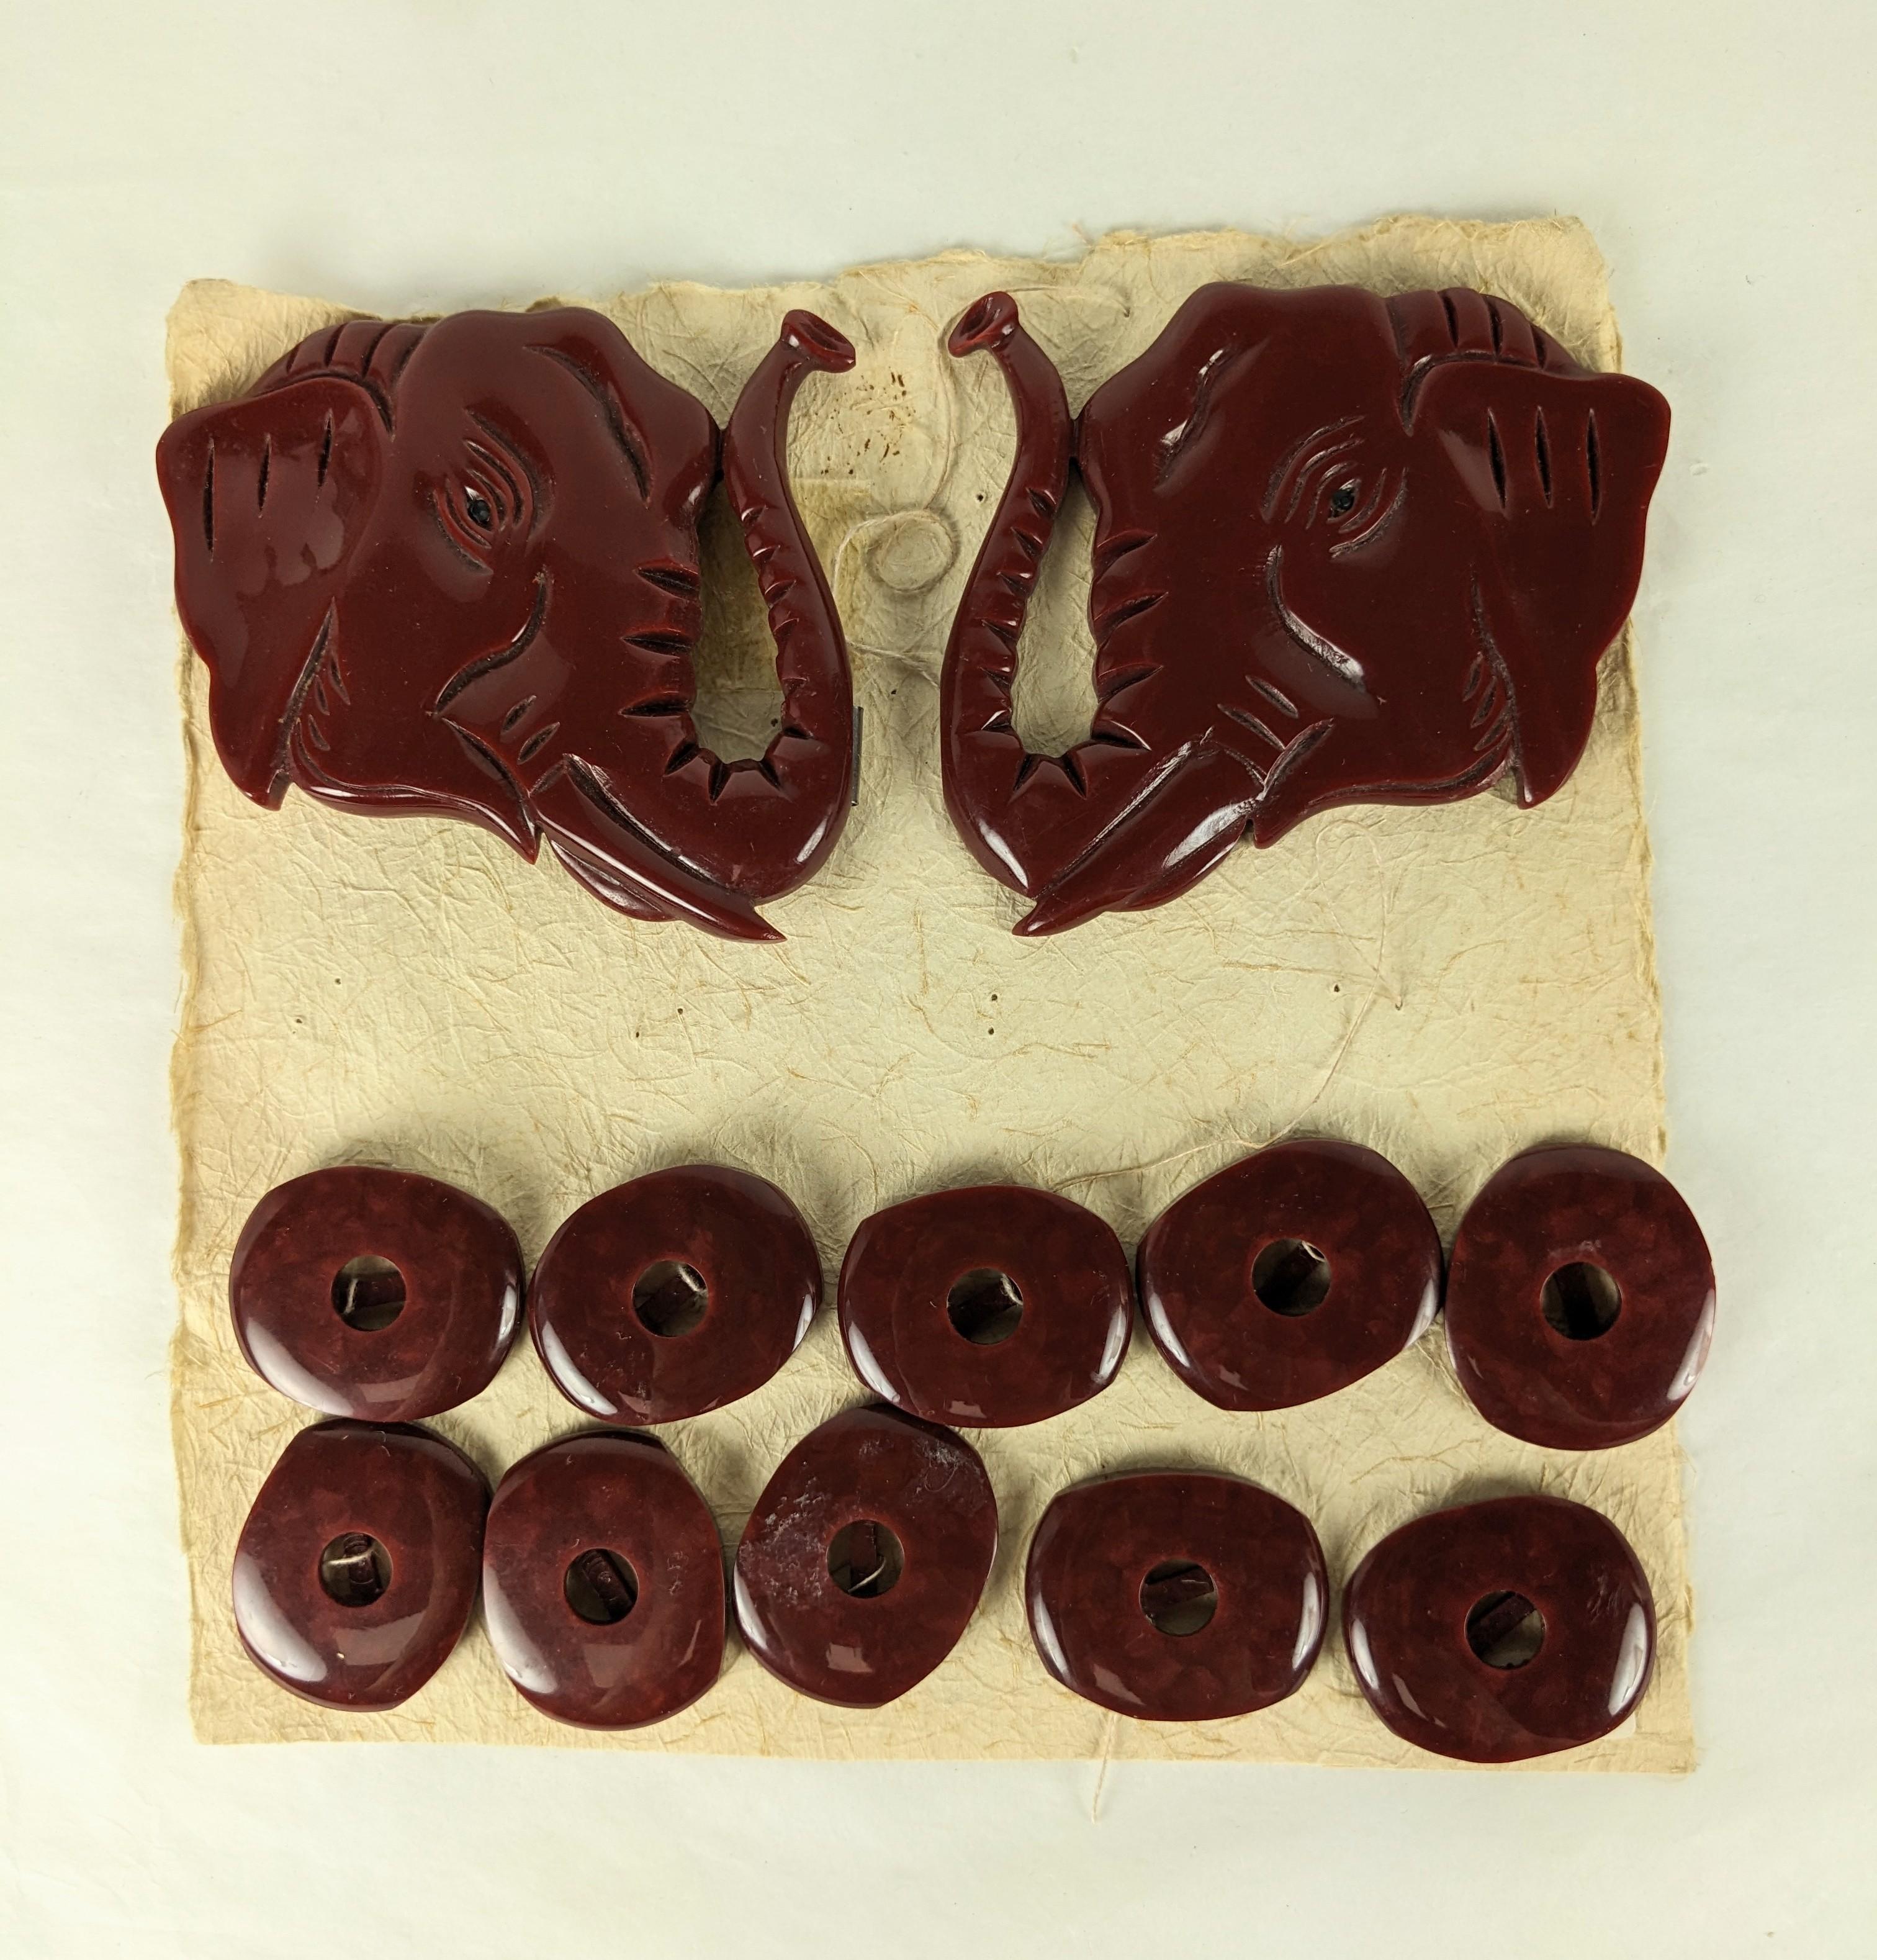 Amazing Carved Bakelite Art Deco Elephant Dress Suite from the 1930's. Huge pair of hand carved elephant heads set with jet eyes form a buckle with a set of 10 matching buttons. A charming high end option for the Art Deco client who wanted to update